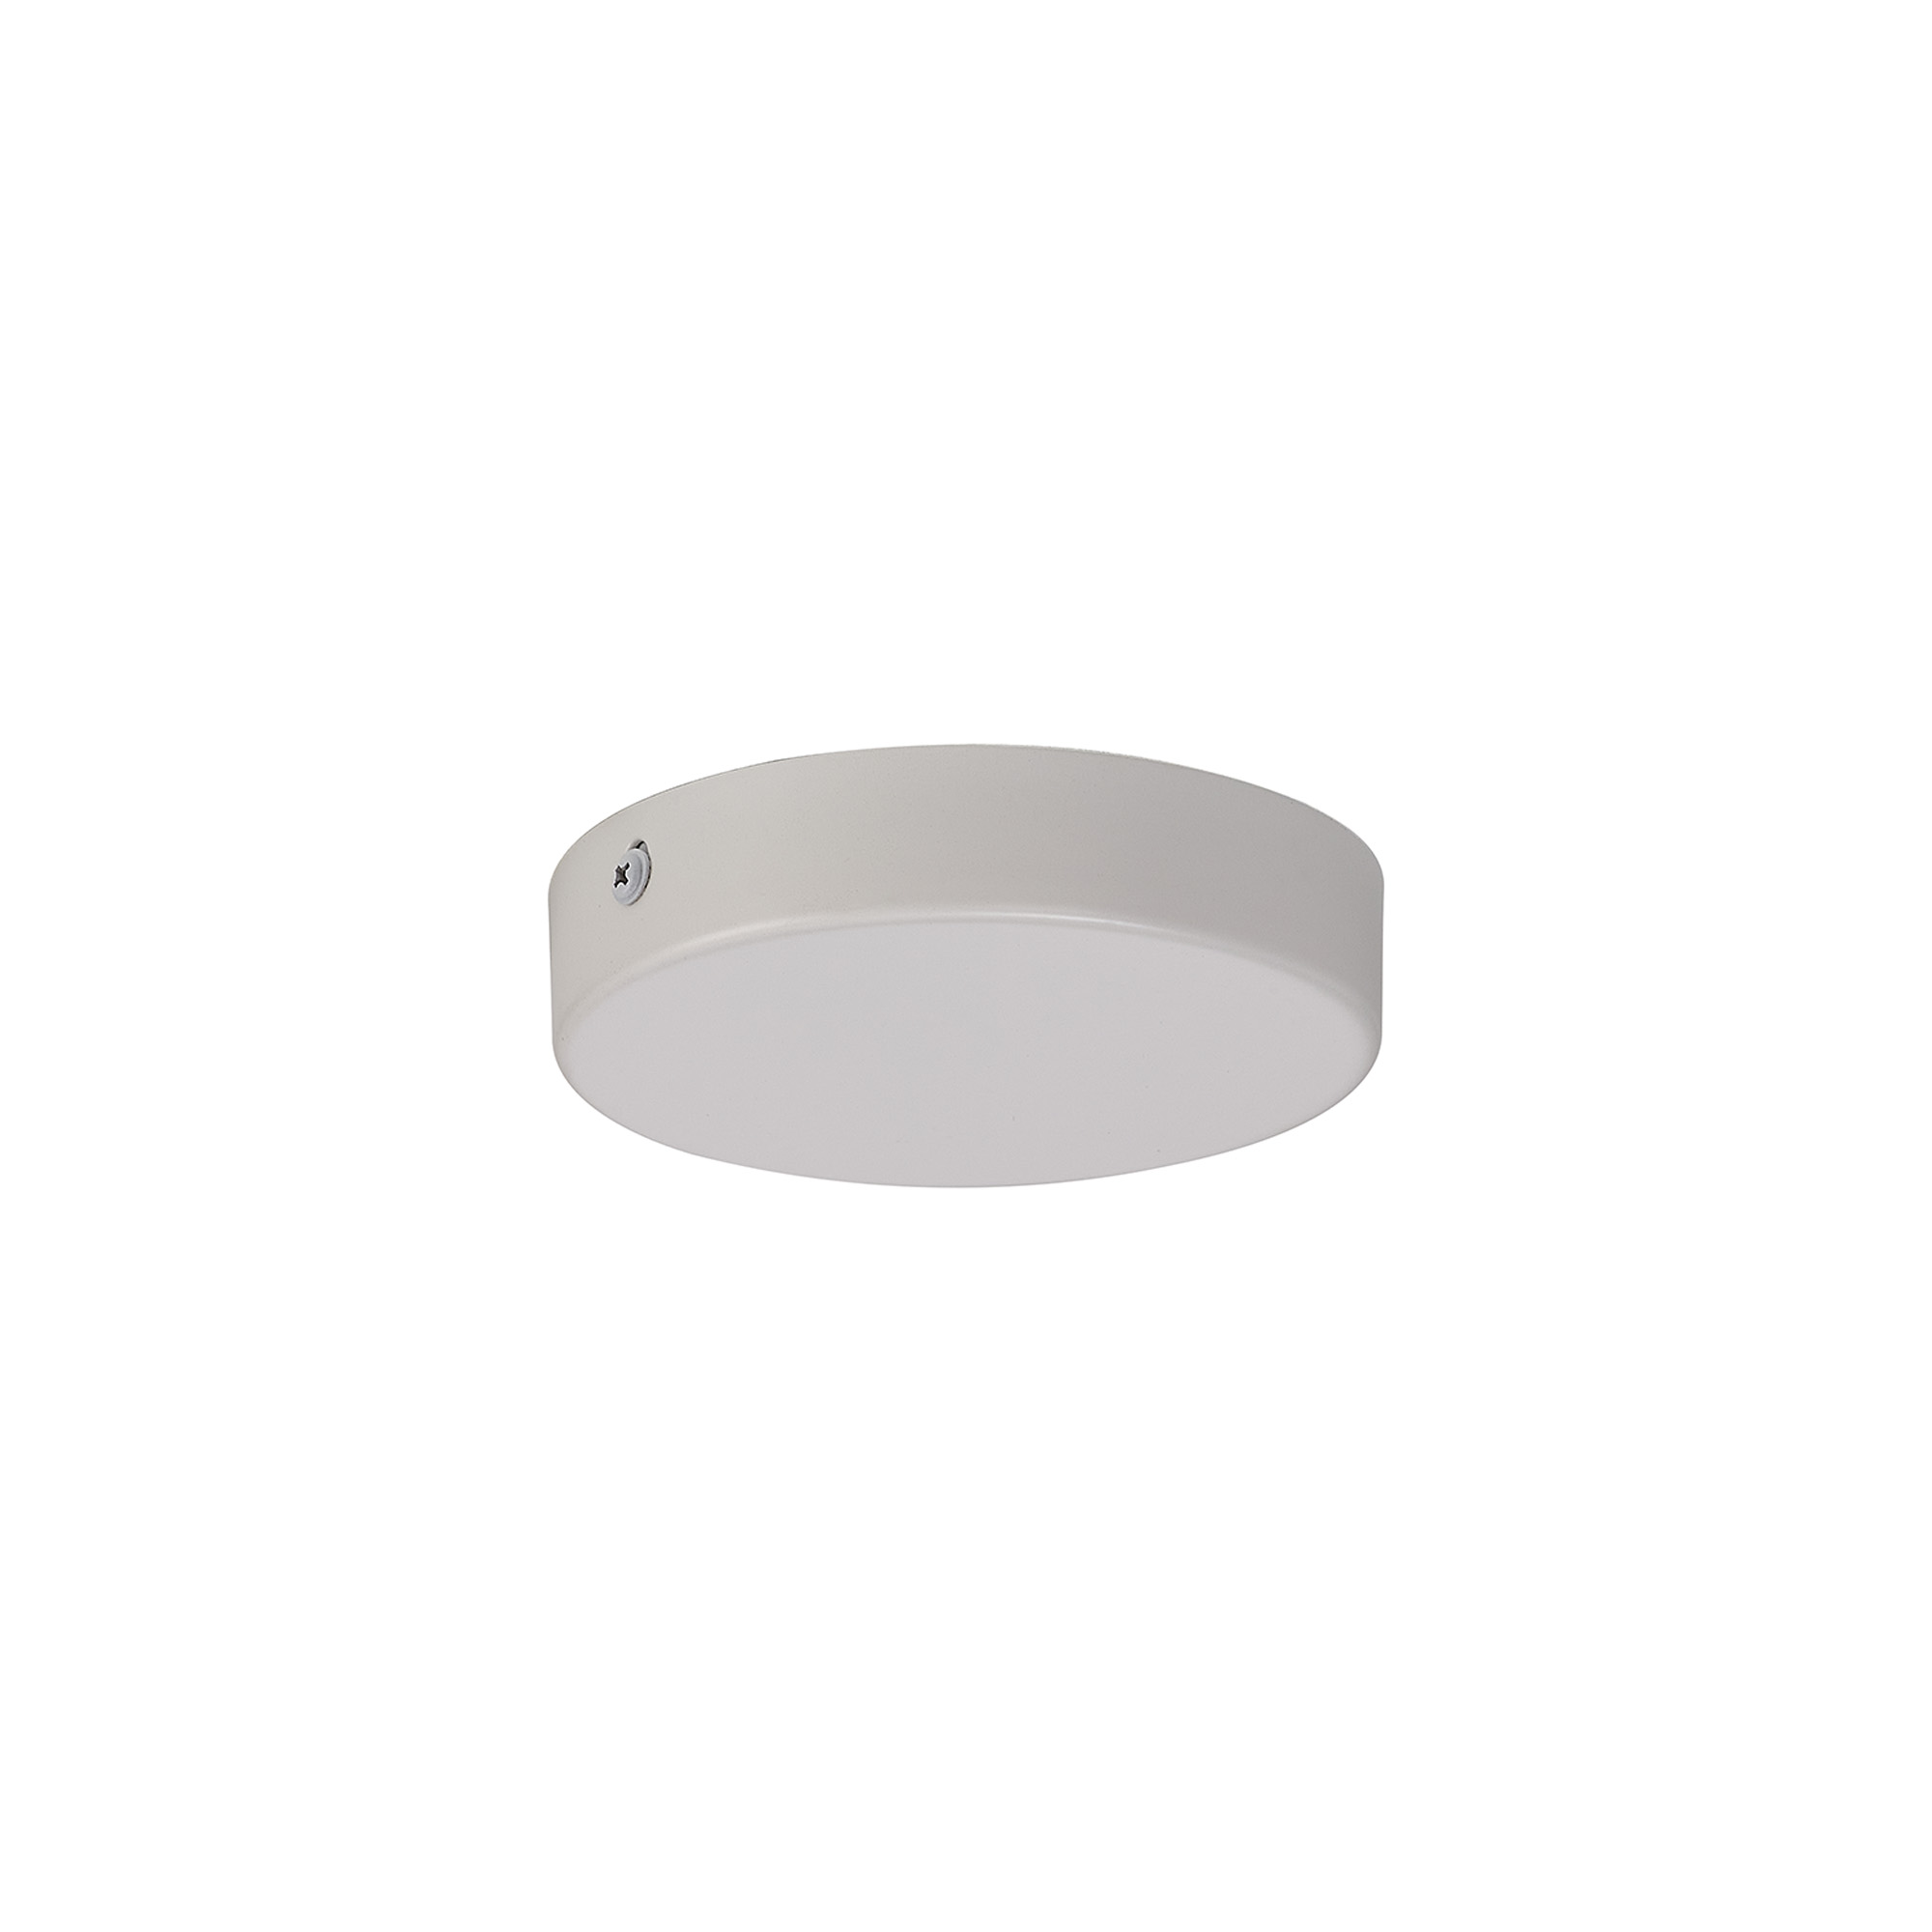 D0827WH/NH  Hayes No Hole 12cm Round Ceiling Plate White